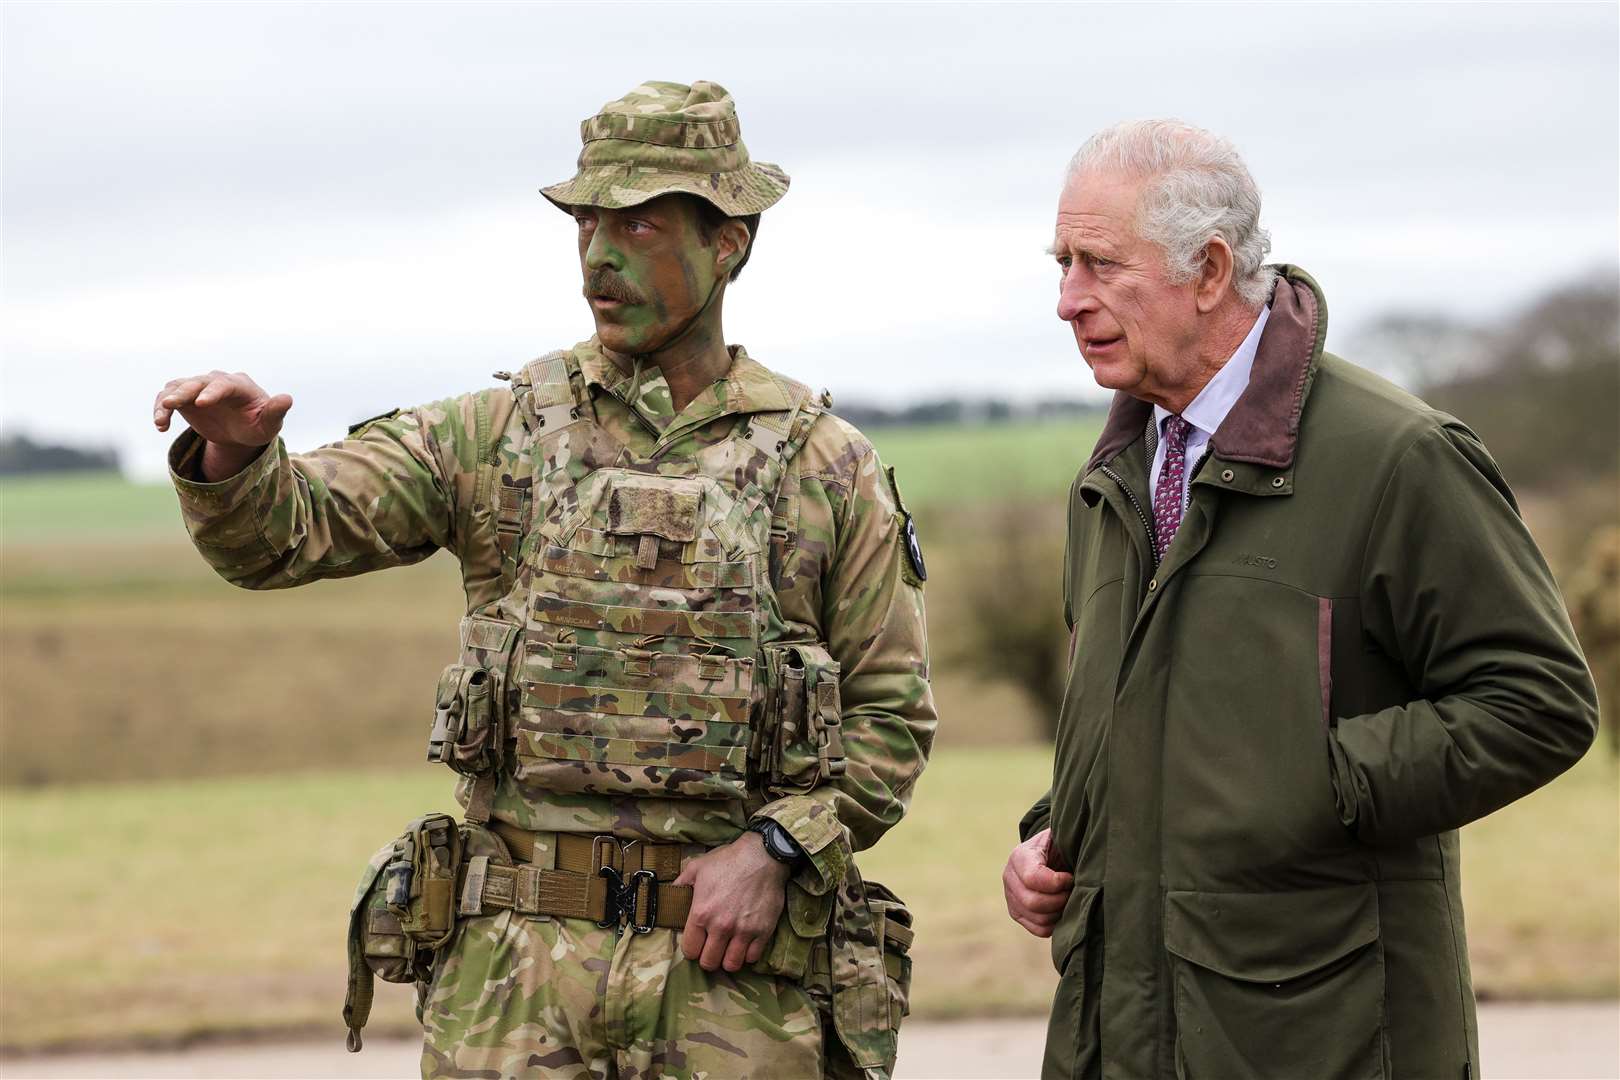 The King meets Major Tony Harris ahead of a trench attack and defence simulation during a visit to a training site for Ukrainian military recruits in Wiltshire (Chris Jackson/PA)